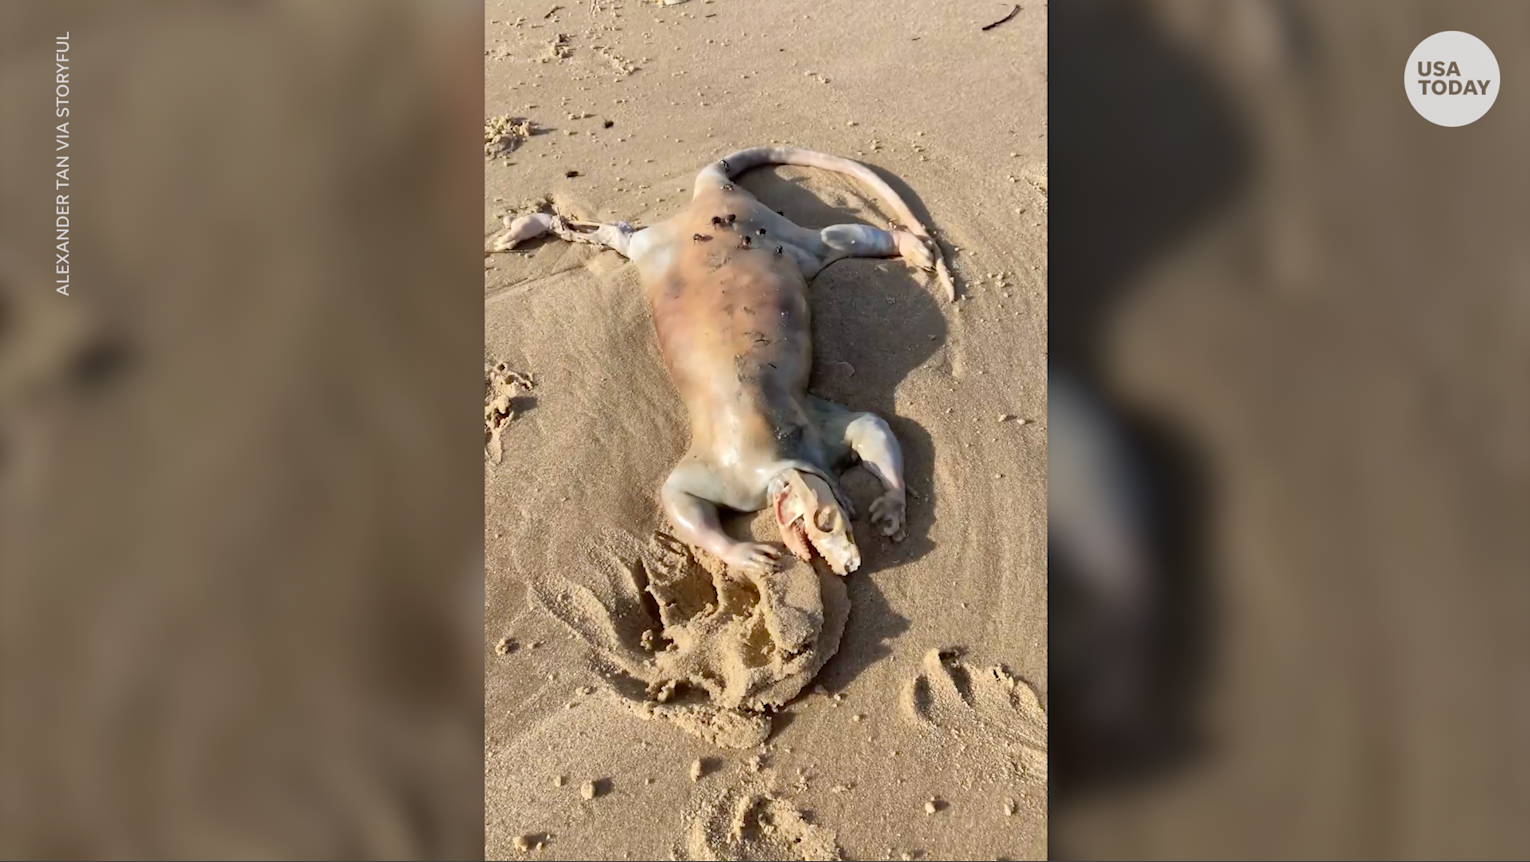 Man finds 'alien' that looks like 'dehaired possum' with claws washed up on Australian beach